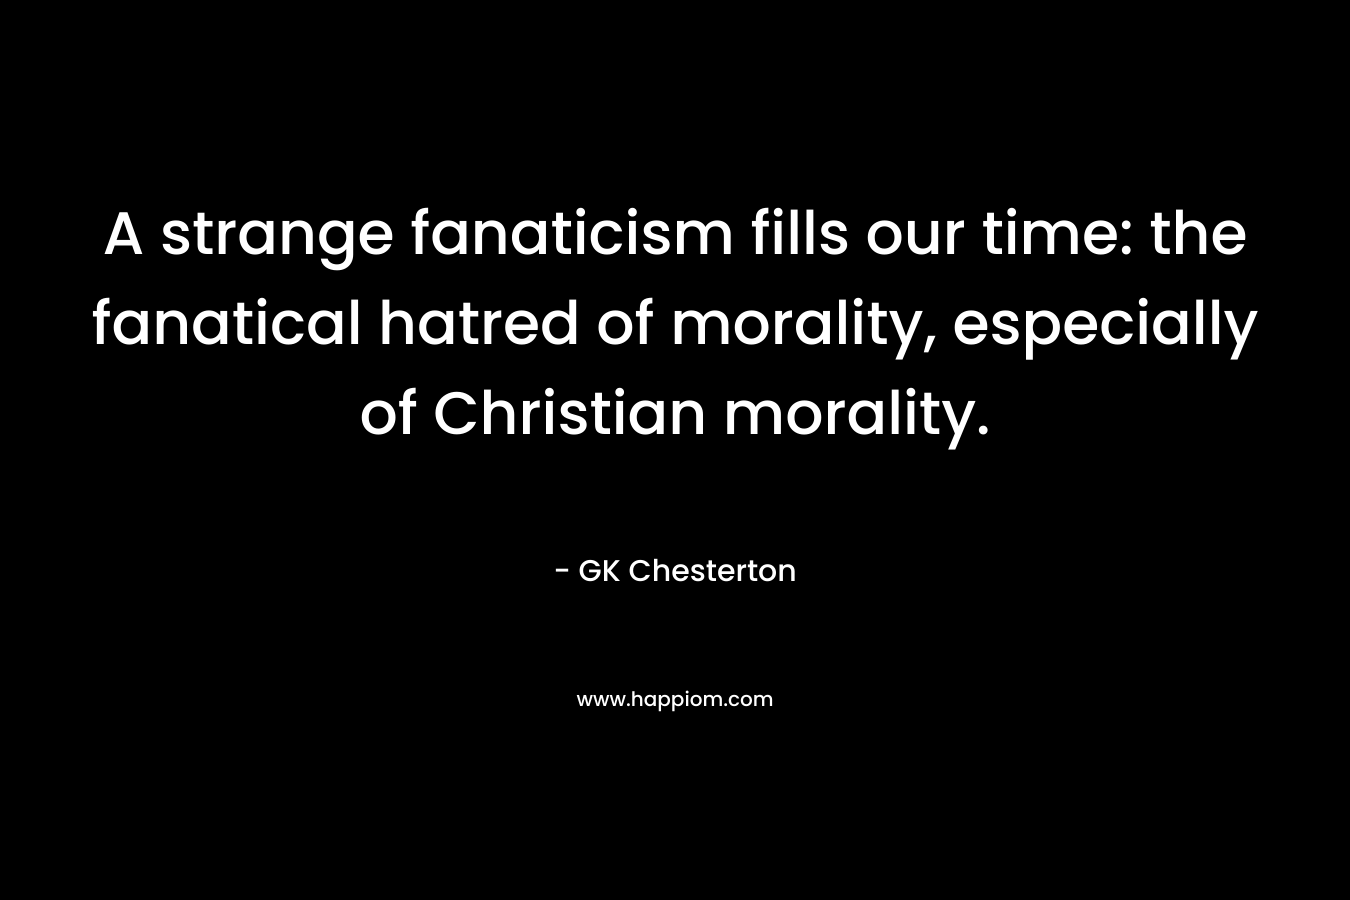 A strange fanaticism fills our time: the fanatical hatred of morality, especially of Christian morality. – GK Chesterton